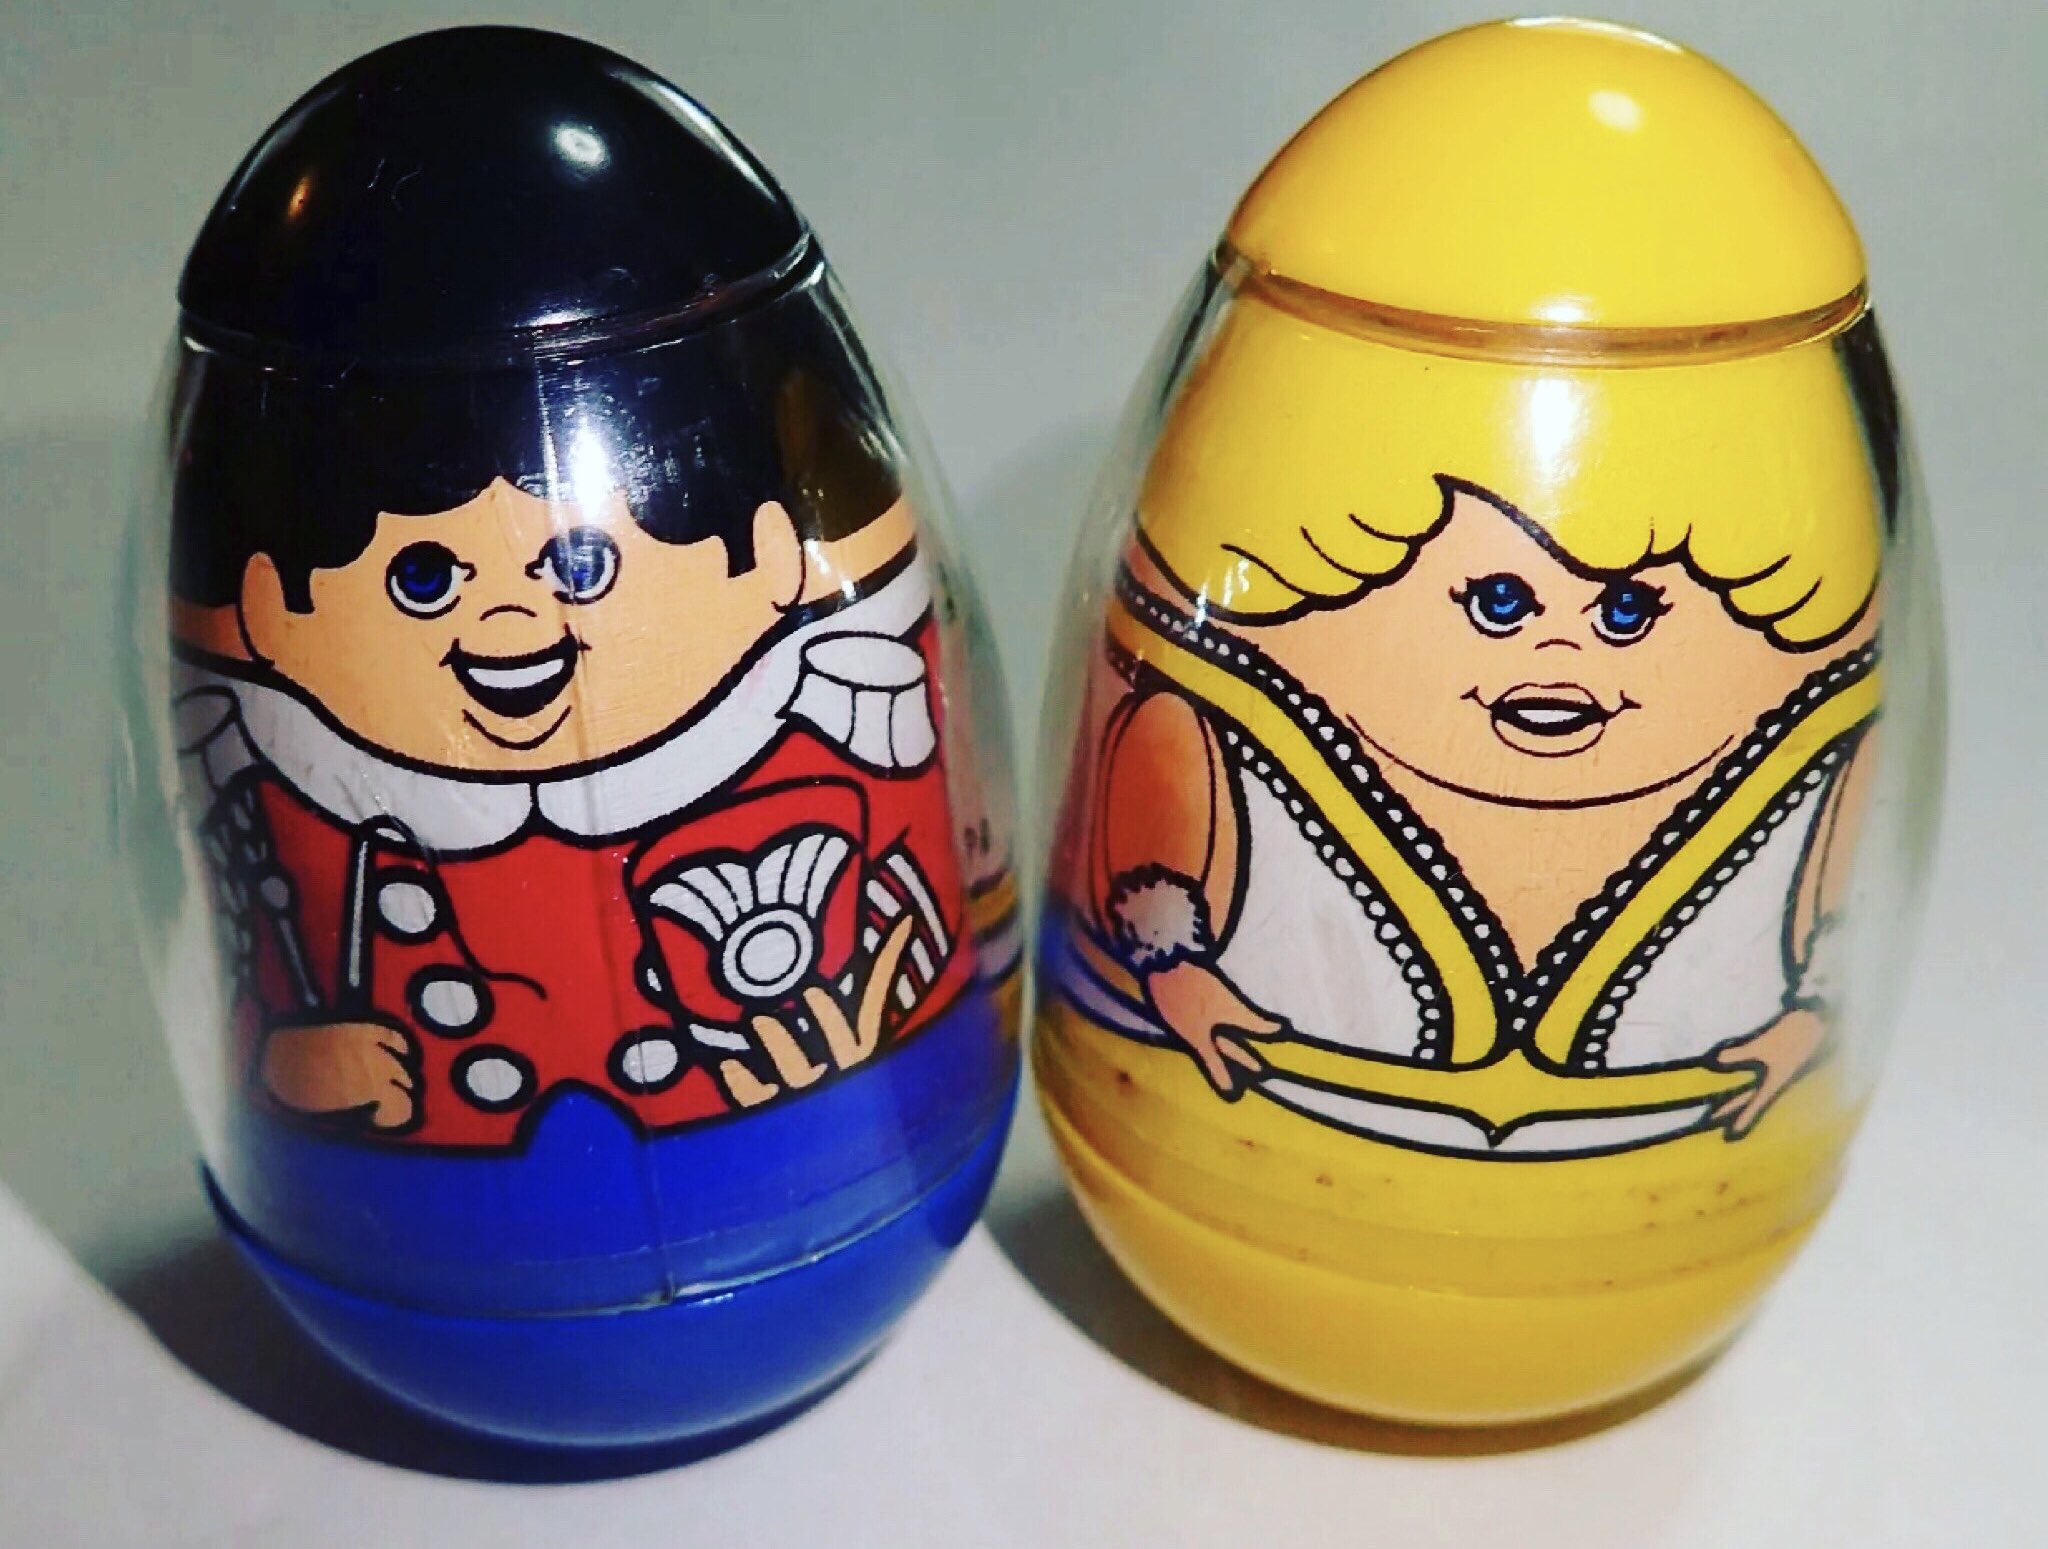 45 Years Later: Weebles Wobble but They Don't Fall Down - Flashbak